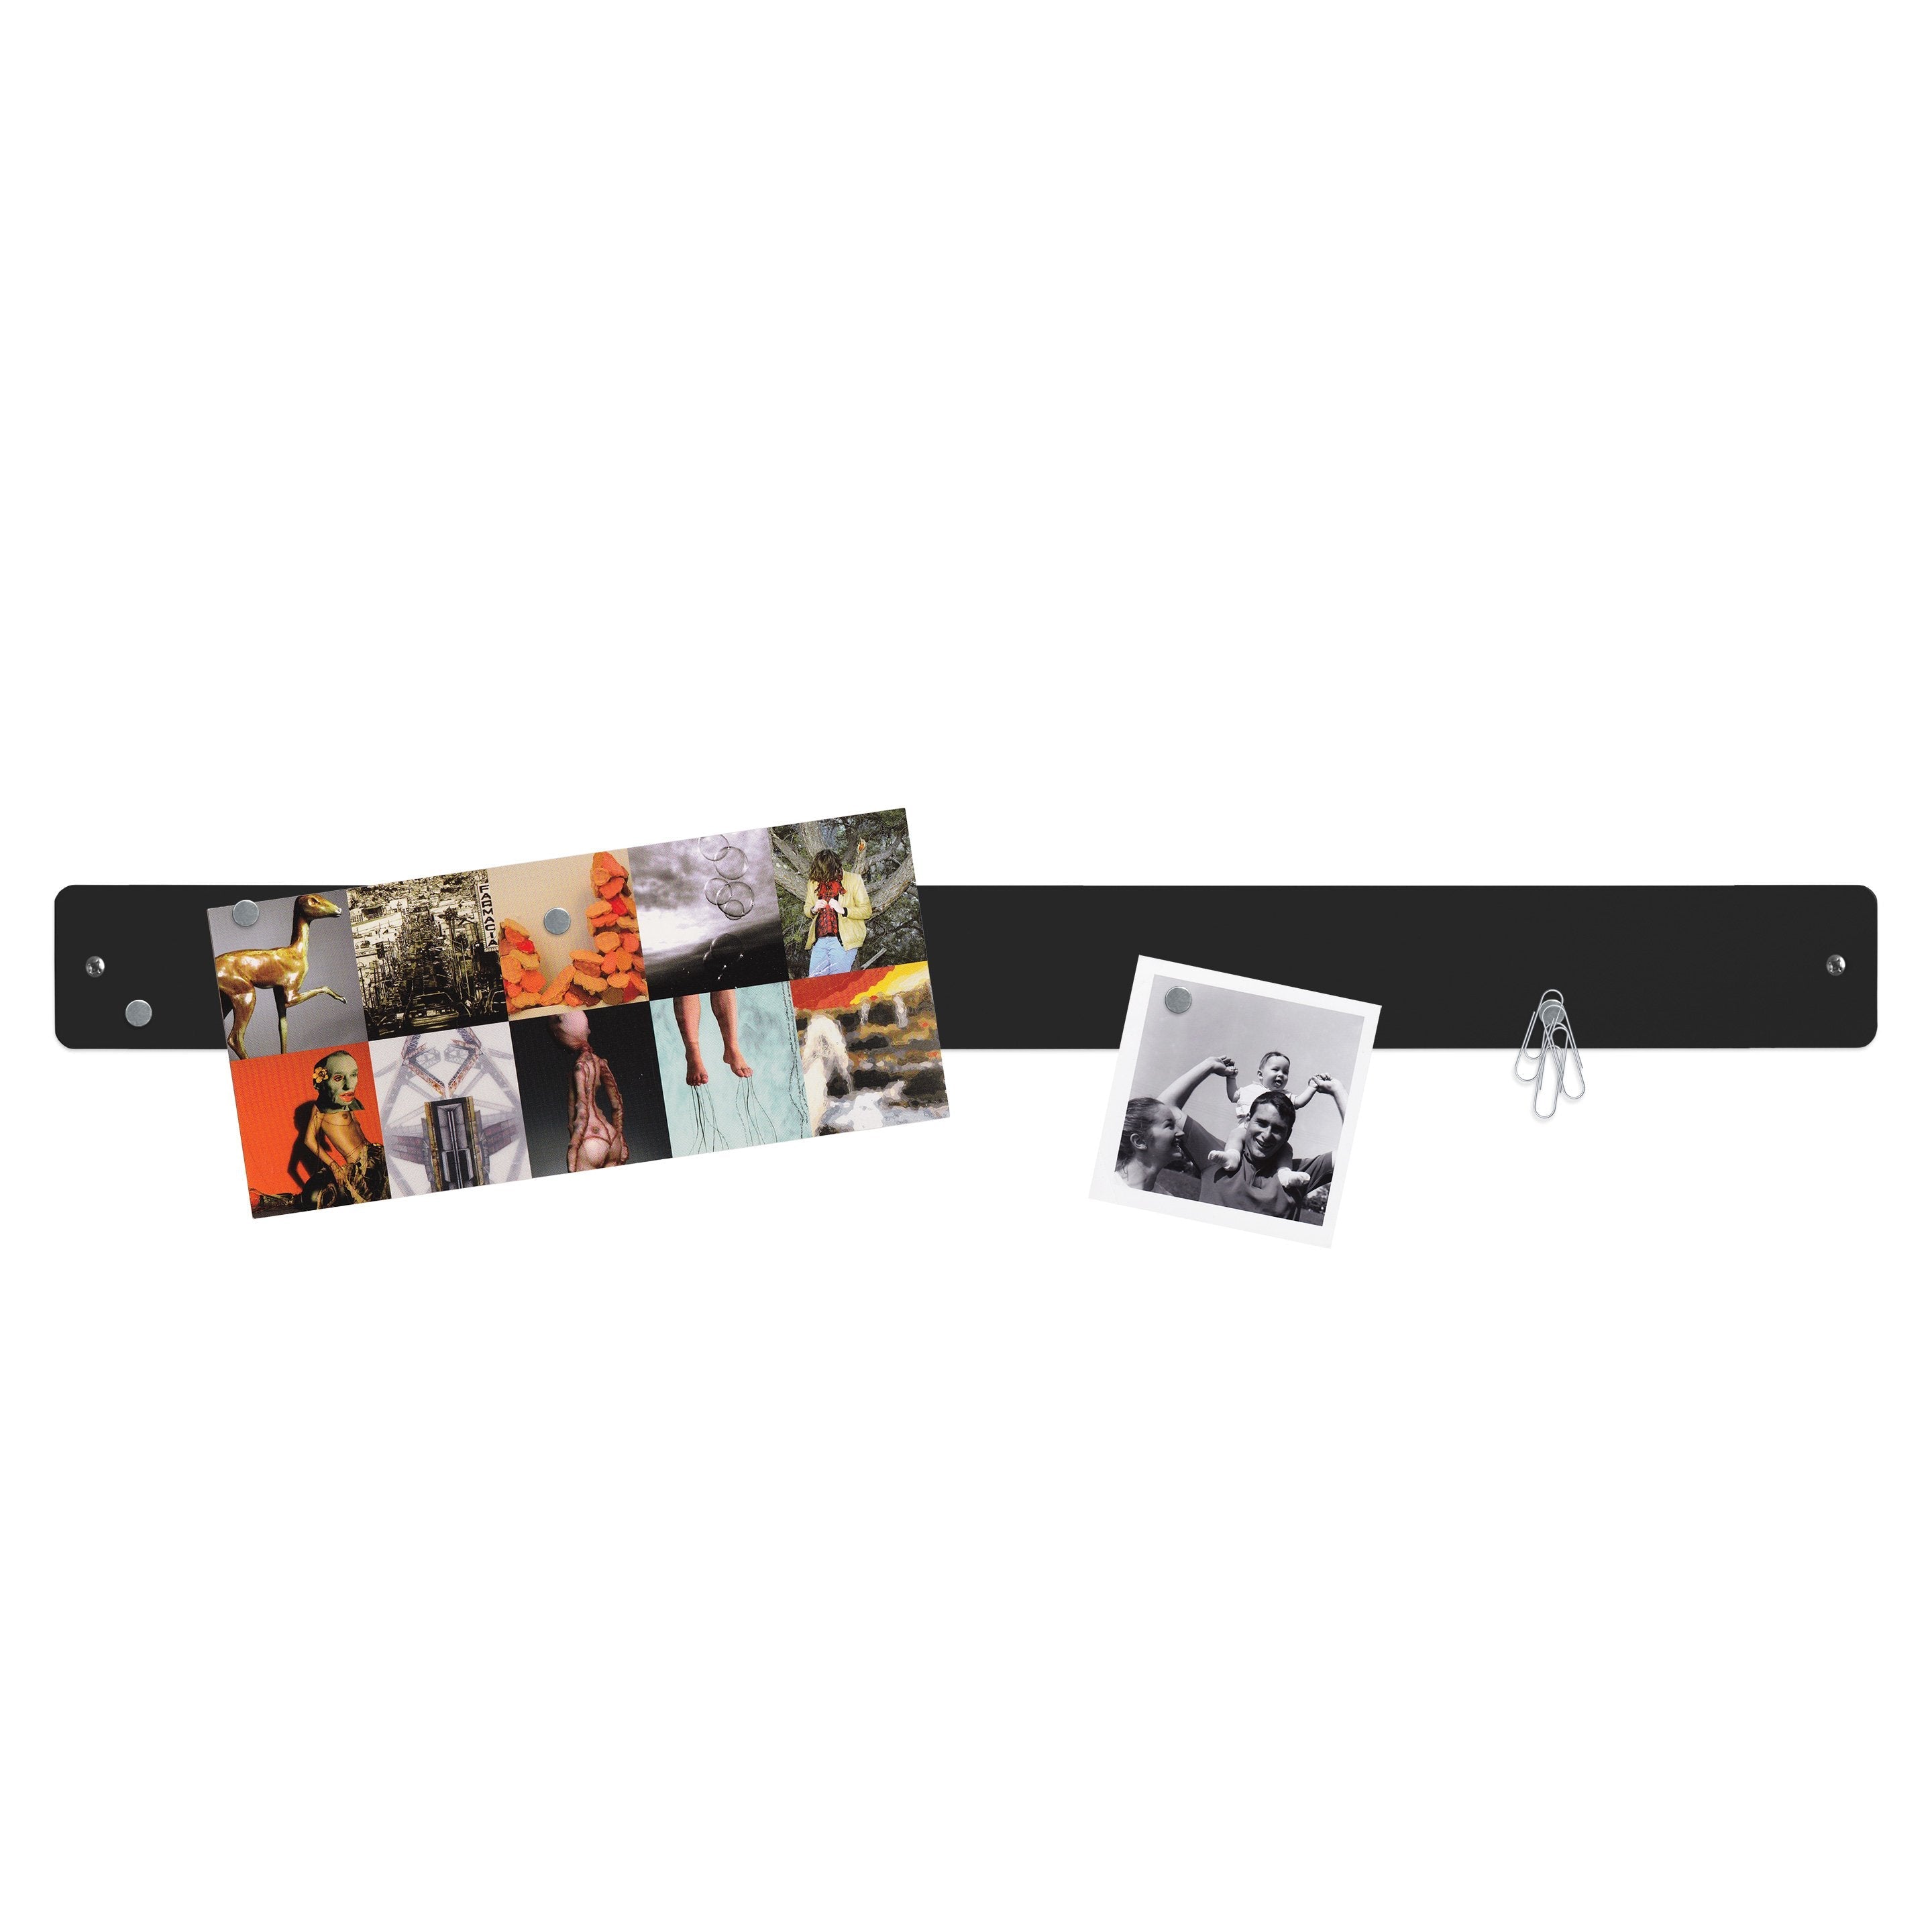 Three by Three Seattle 28 x 2.5 Inch Metal Strip Frameless Magnetic  Bulletin Board with 12 Magnets for Memos, Photos, Lists, and More in  Office, Home